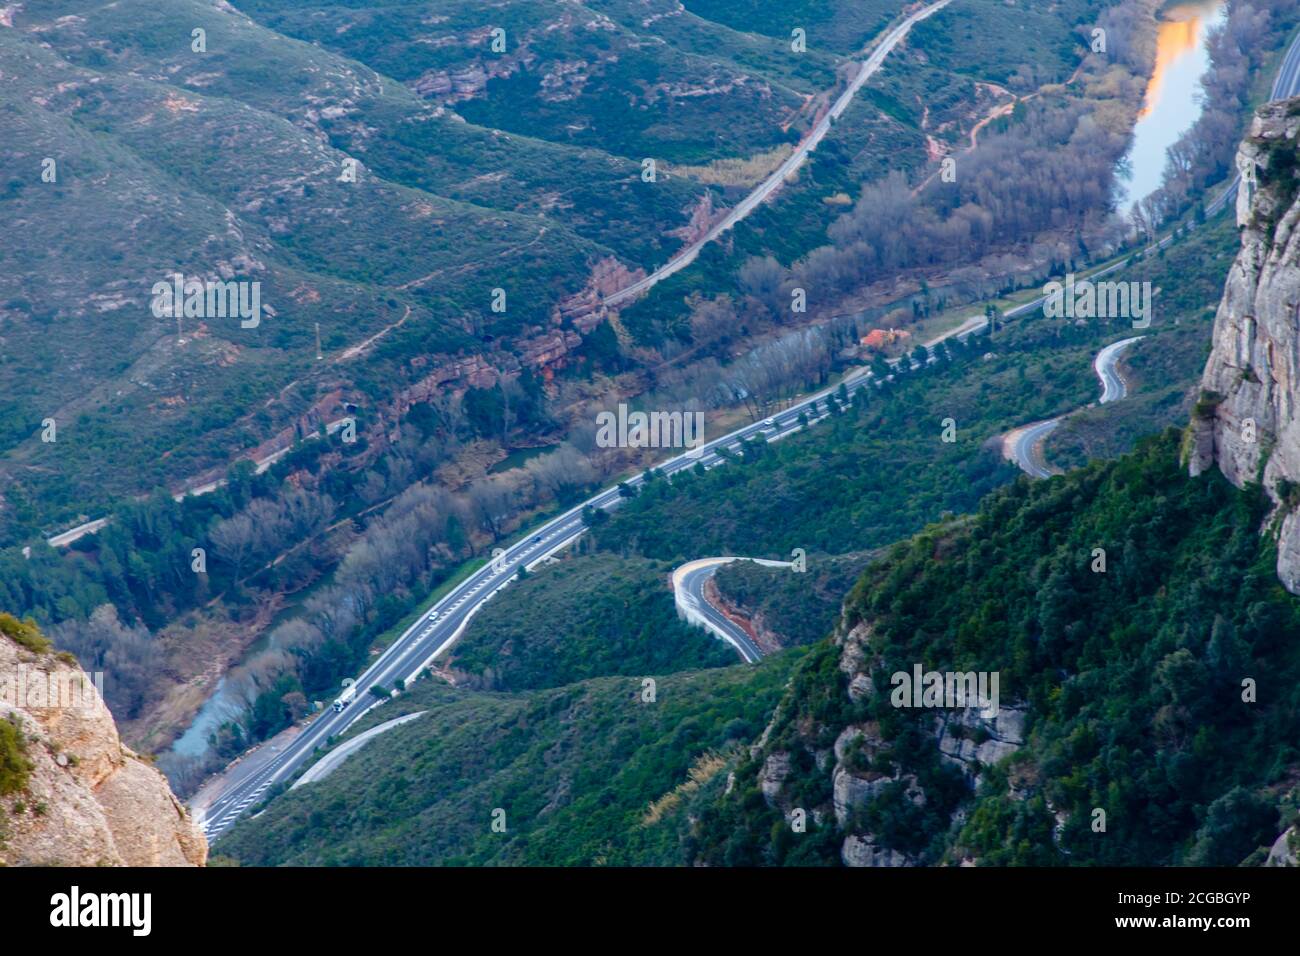 The road runs along the river between the mountains. Stock Photo